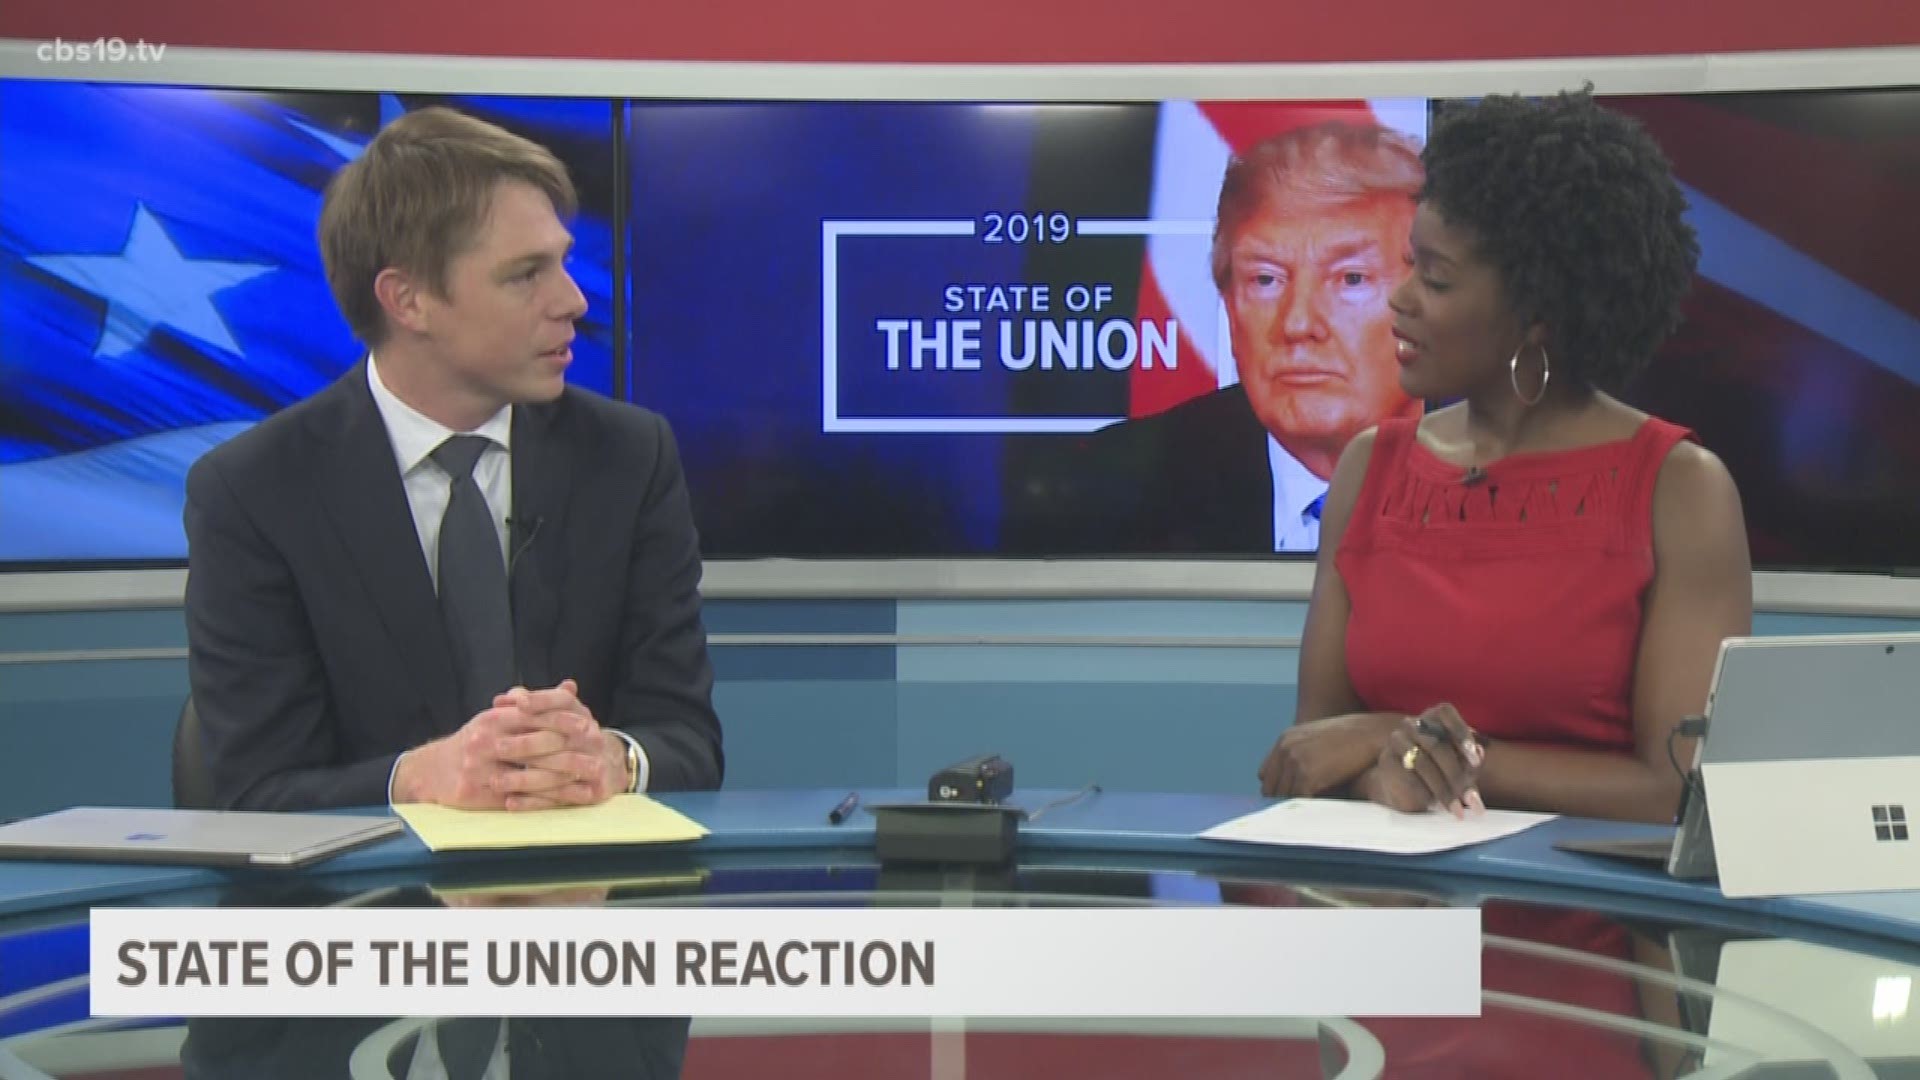 Dr. Mark Owens, an assistant professor of Political Science at UT Tyler speaks with Tashara Parker about his thoughts on the State of the Union.